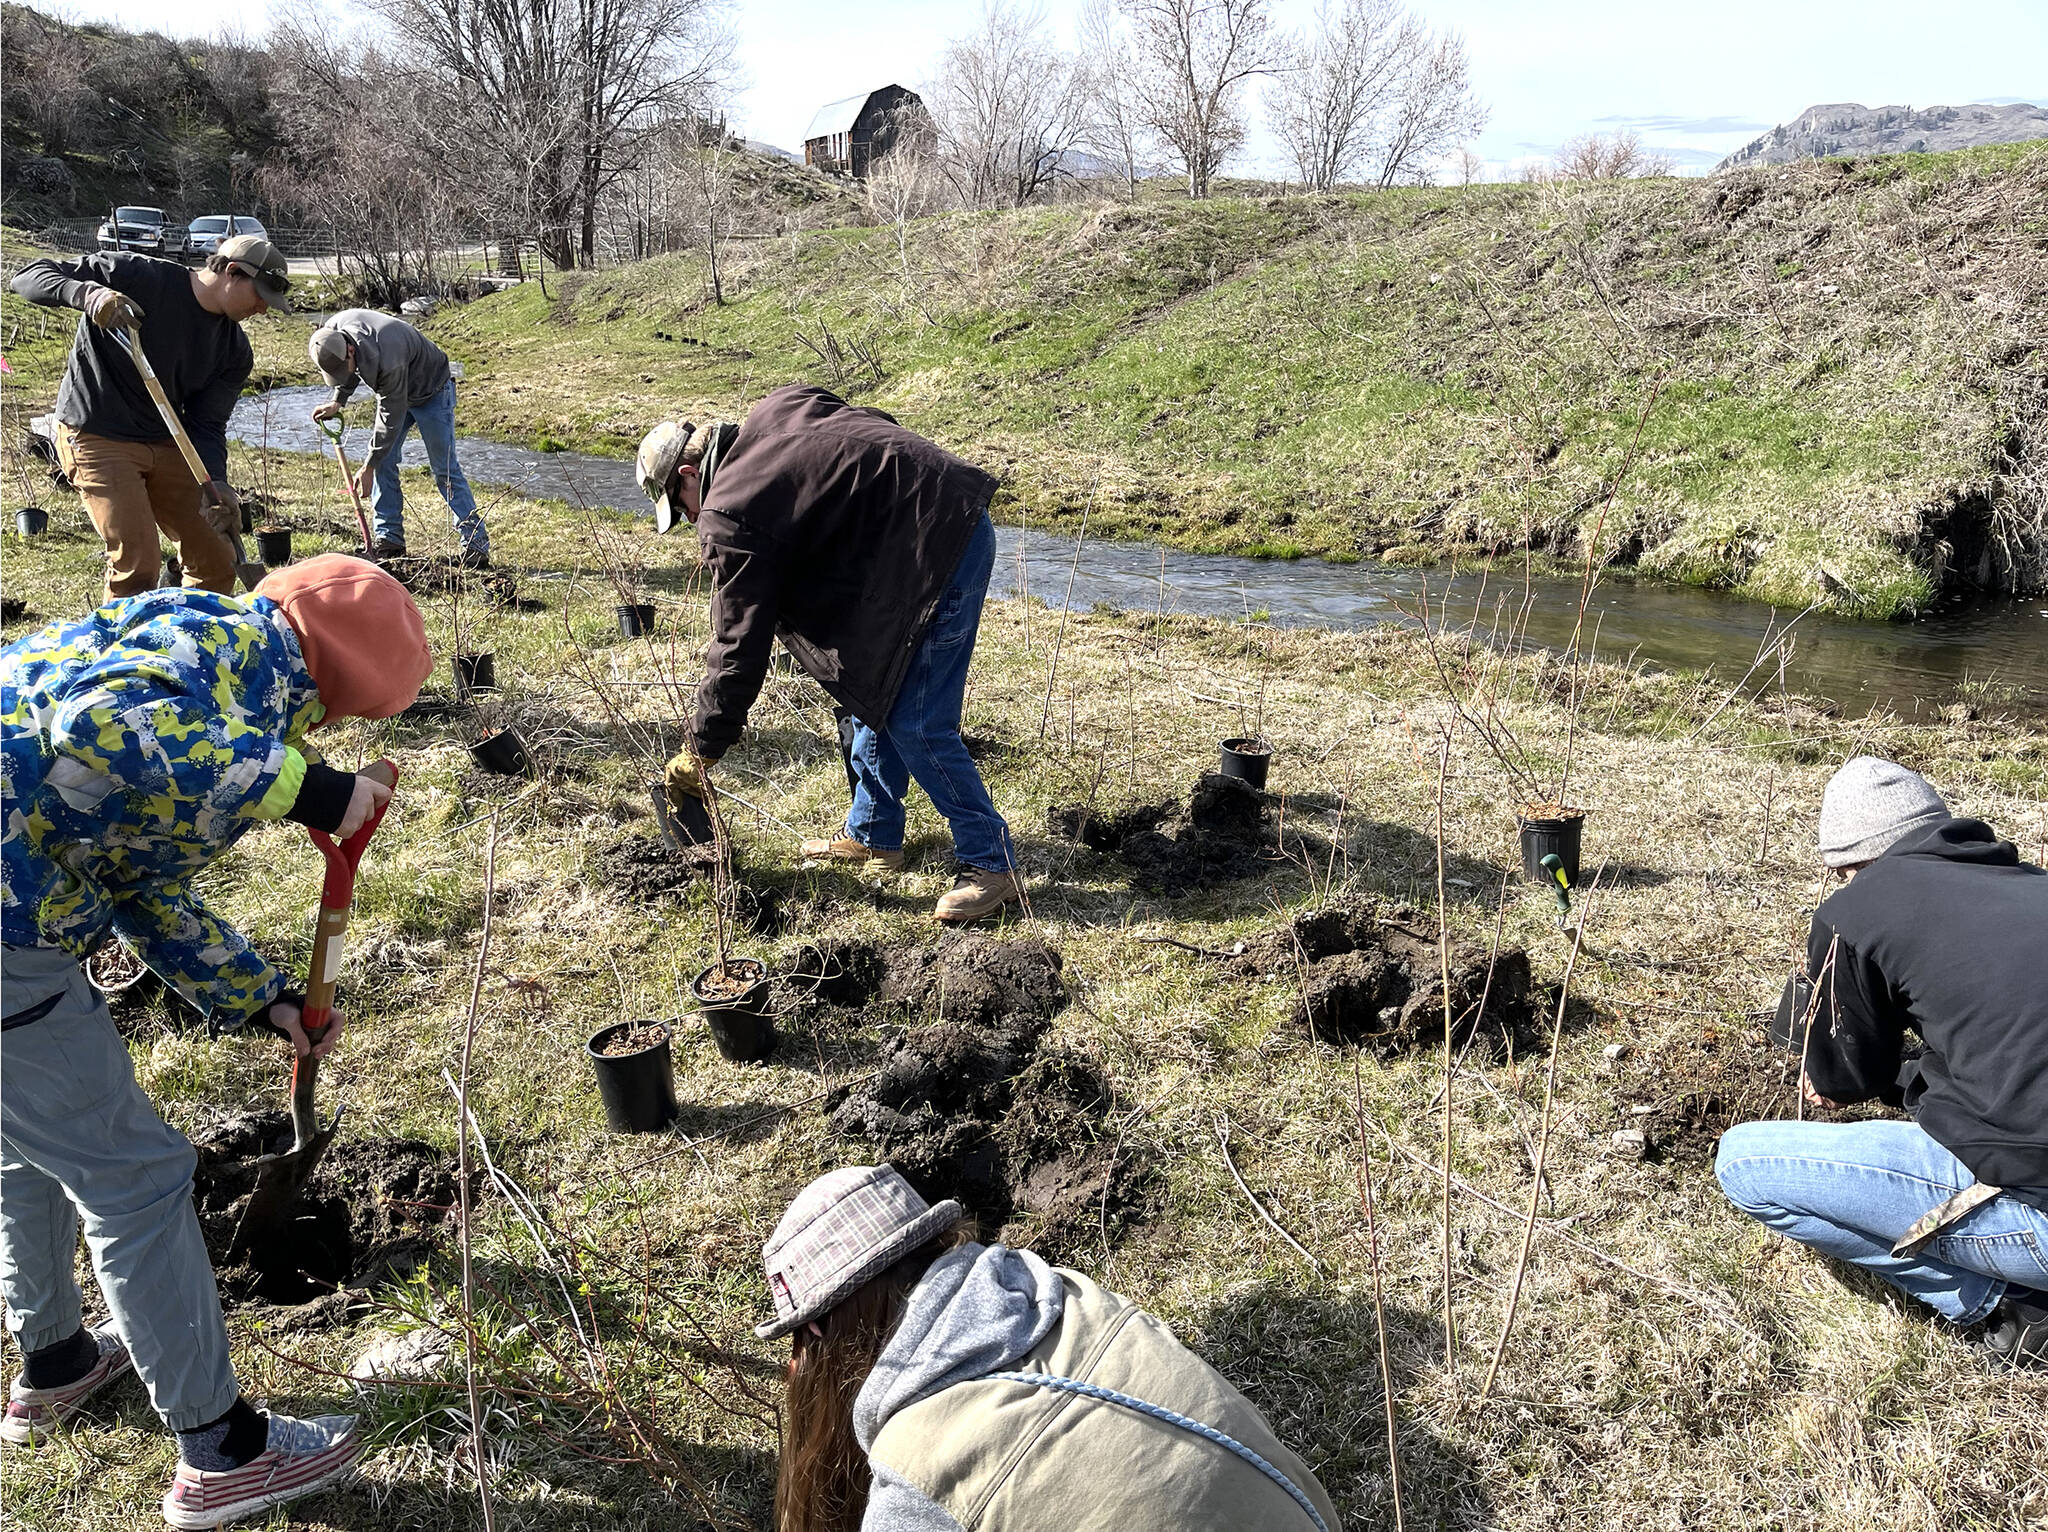 Okanogan CD/submitted photo
Volunteers help to restore 2.5 miles of Antoine Creek with the Okanogan Conservation District, aided by local ranchers and the Colville Confederated Tribes. Oroville High School students also helped to plant several species of native plants along the creek.